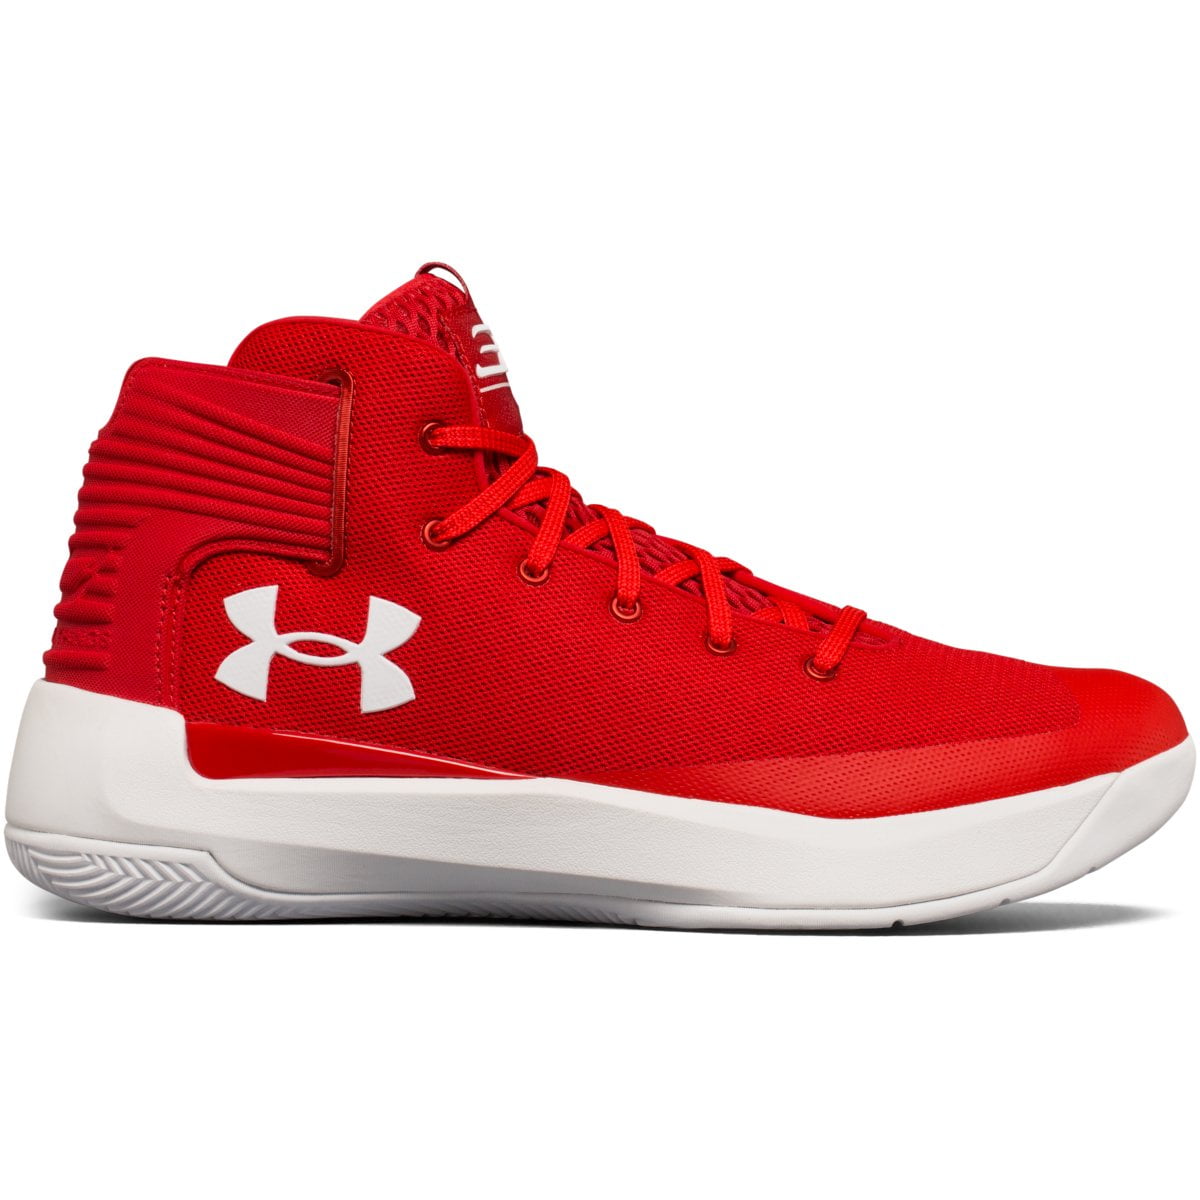 under armour curry 3zero basketball shoes